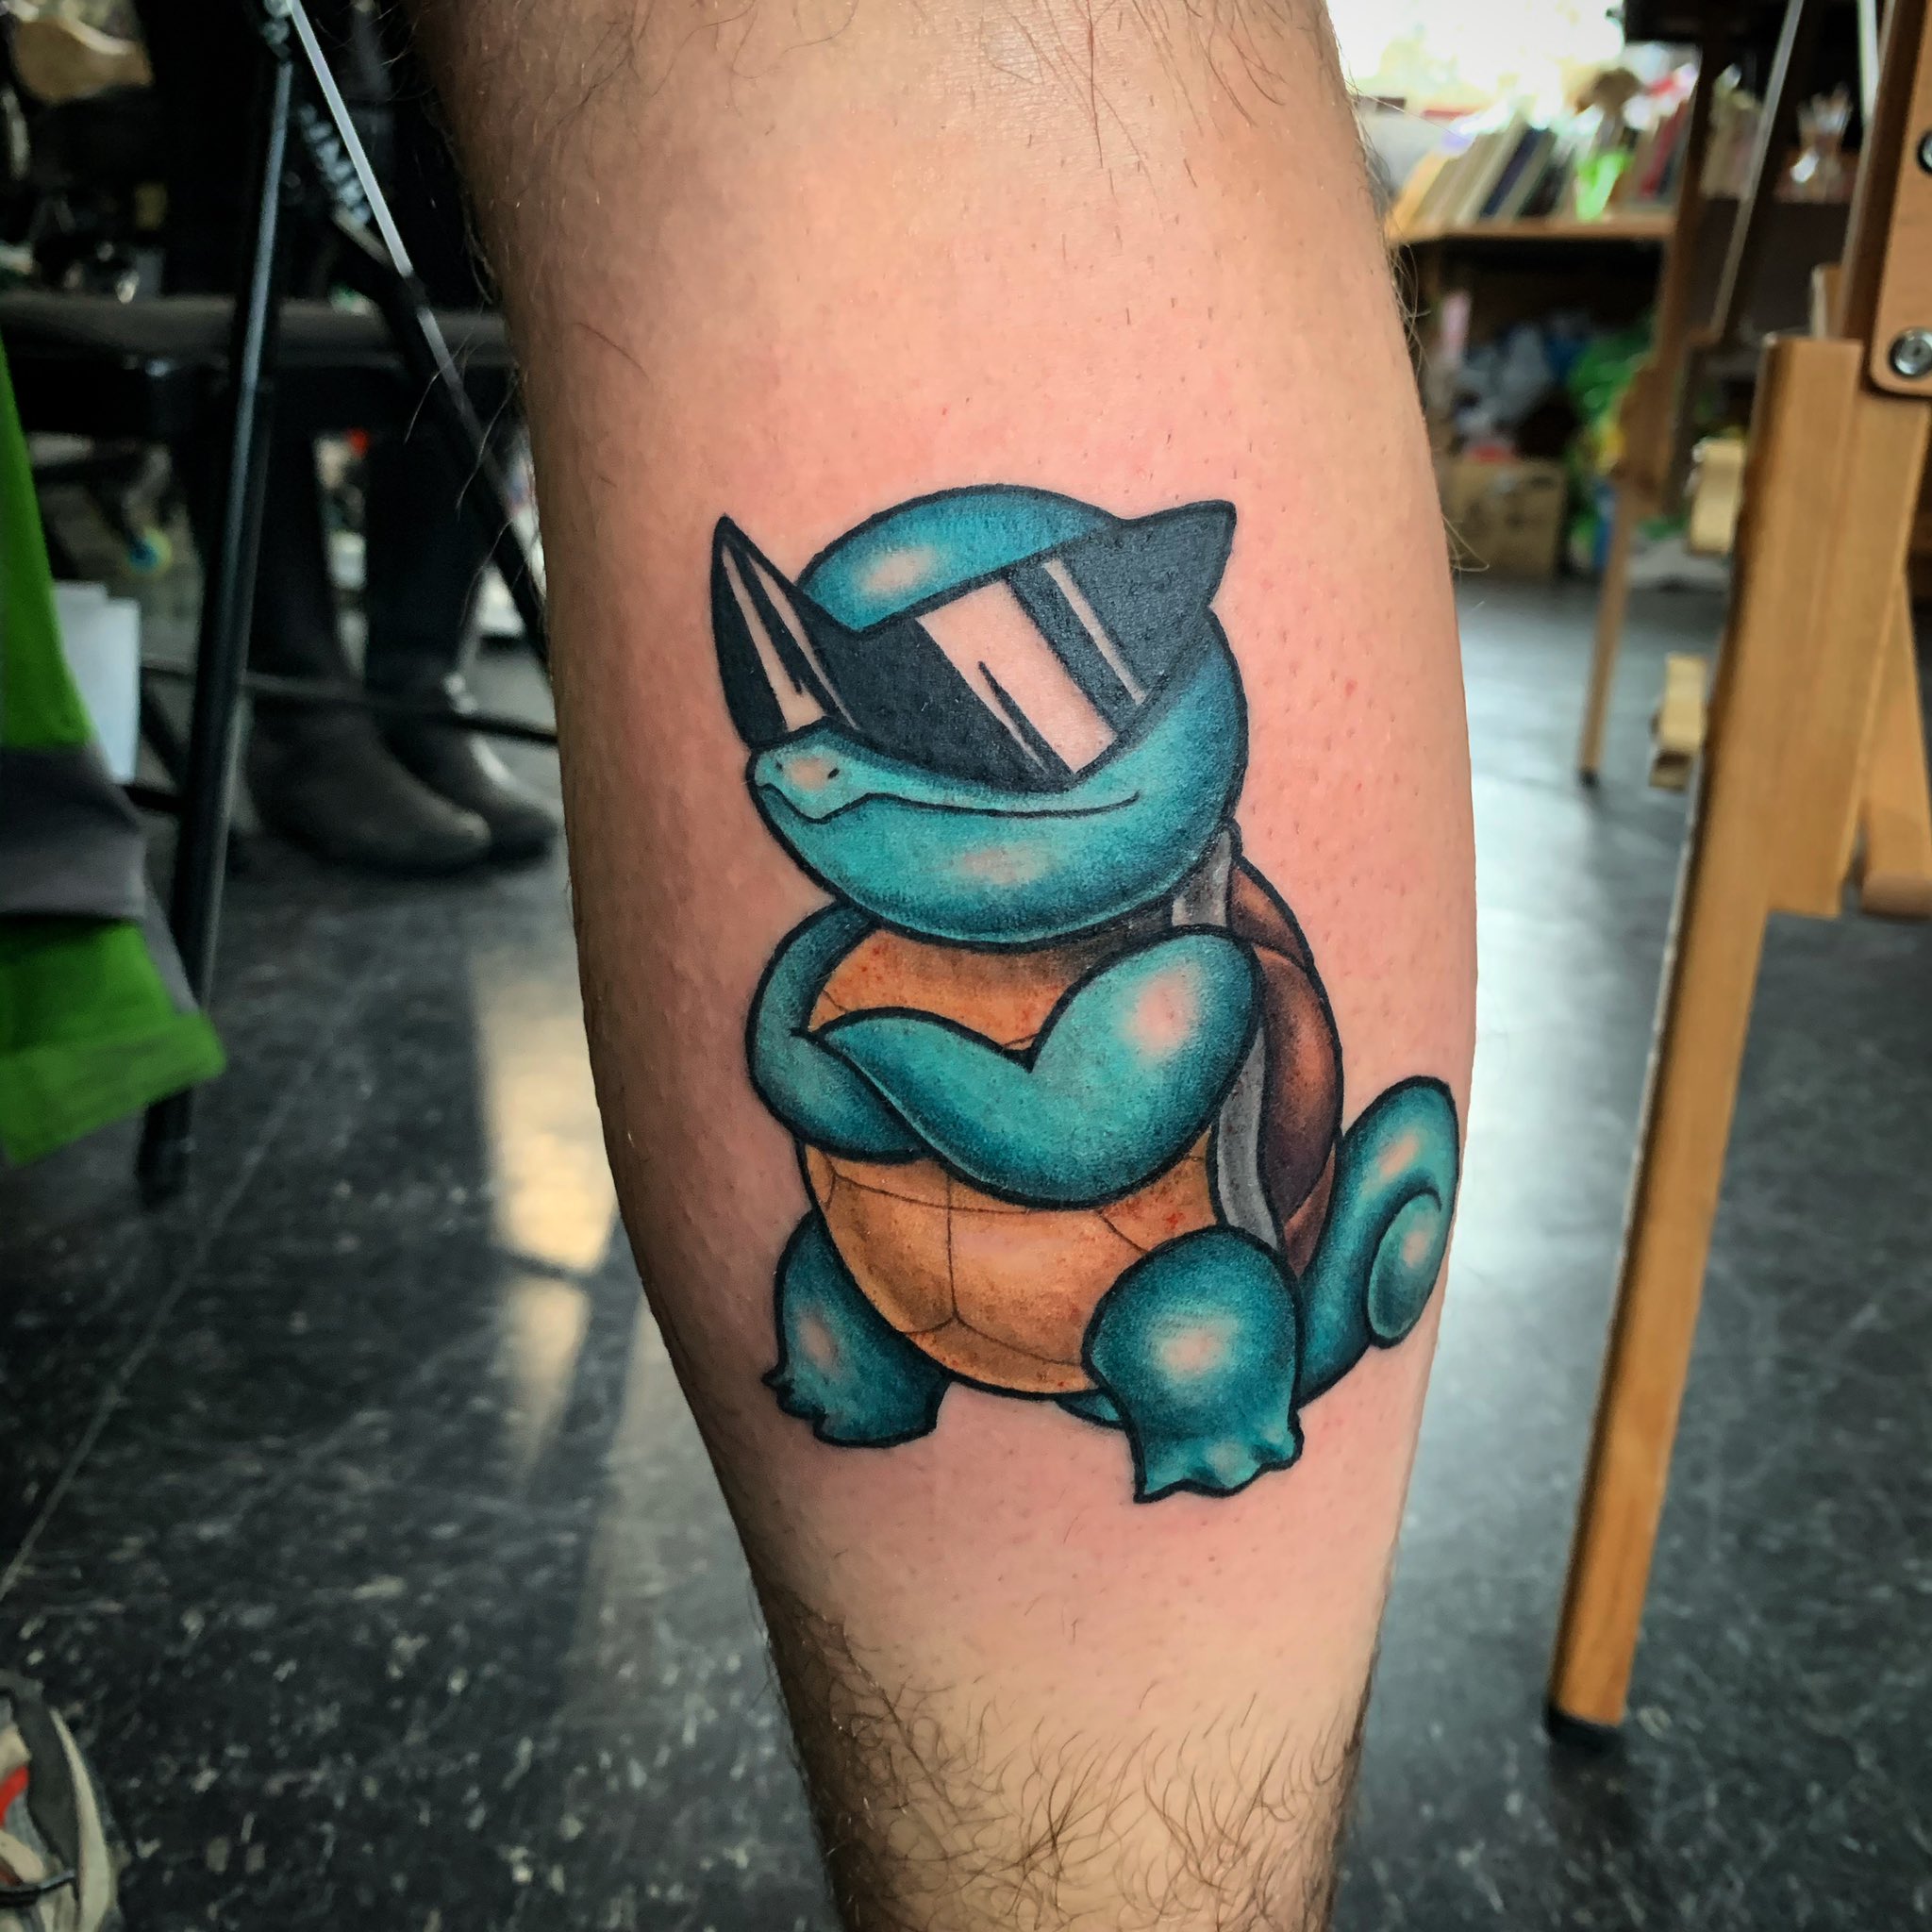 Tattoo squirtle squad Squirtle squad